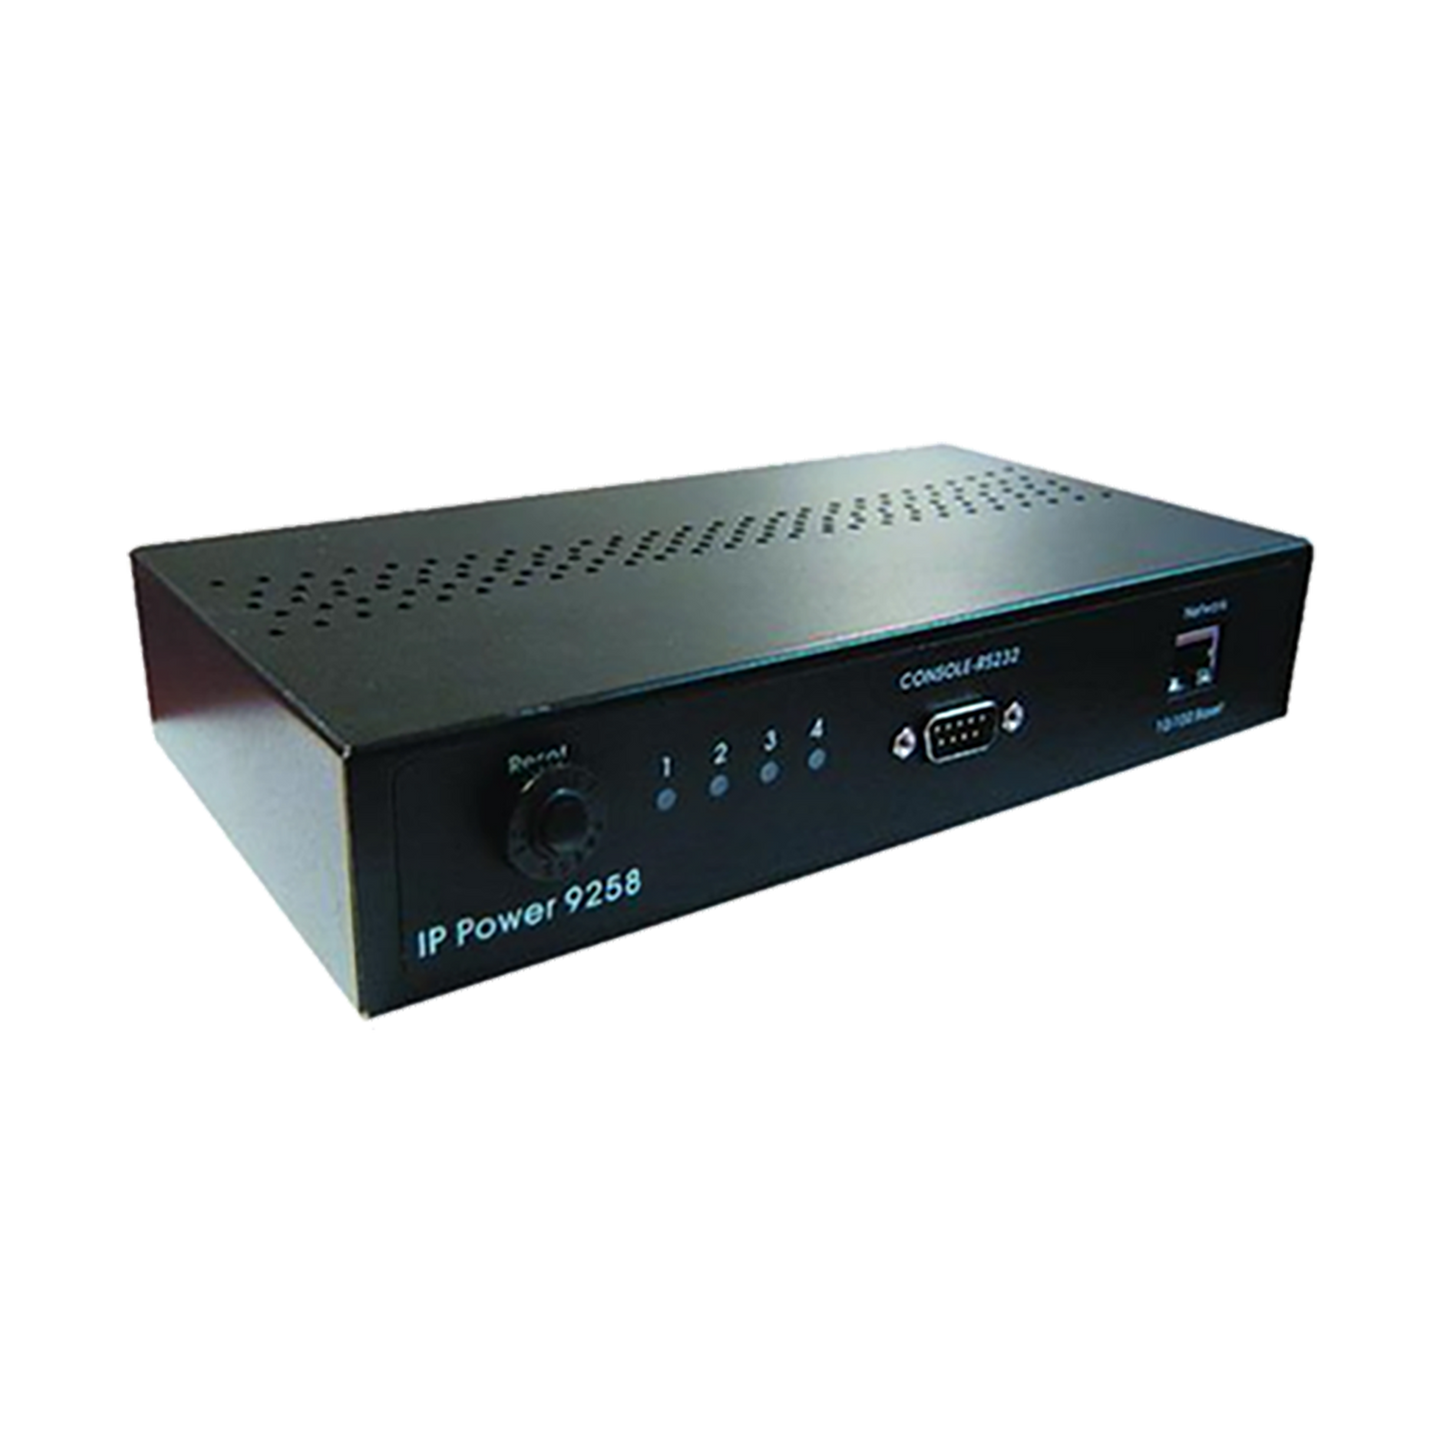 Aviosys IP Power Switch 9258S Ethernet Remote Power Switch with 4 Ports